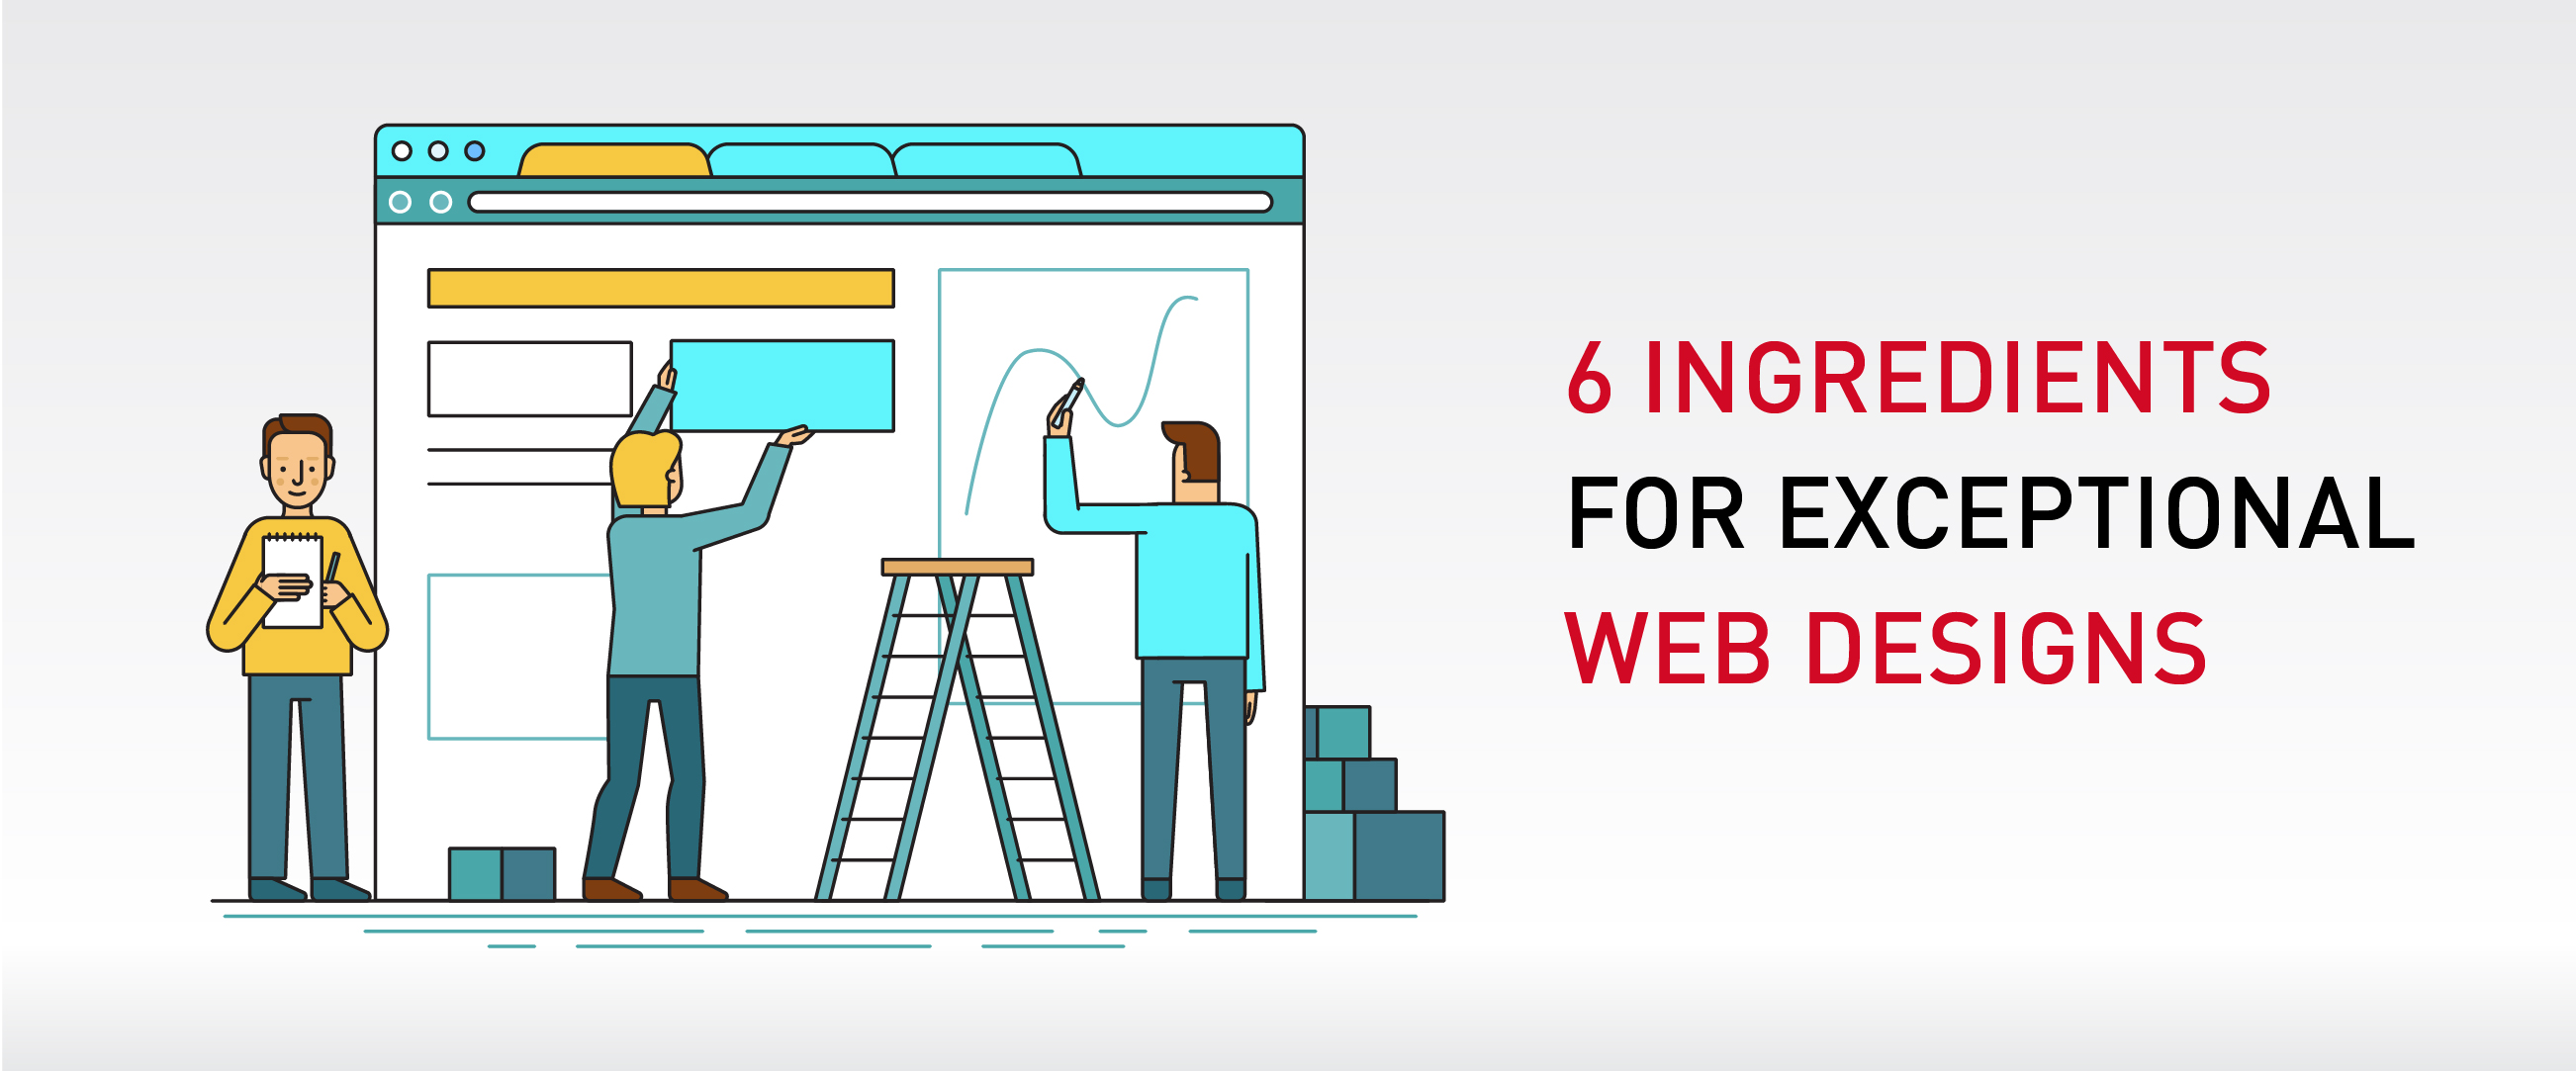 6 ingredients for exceptional web designs